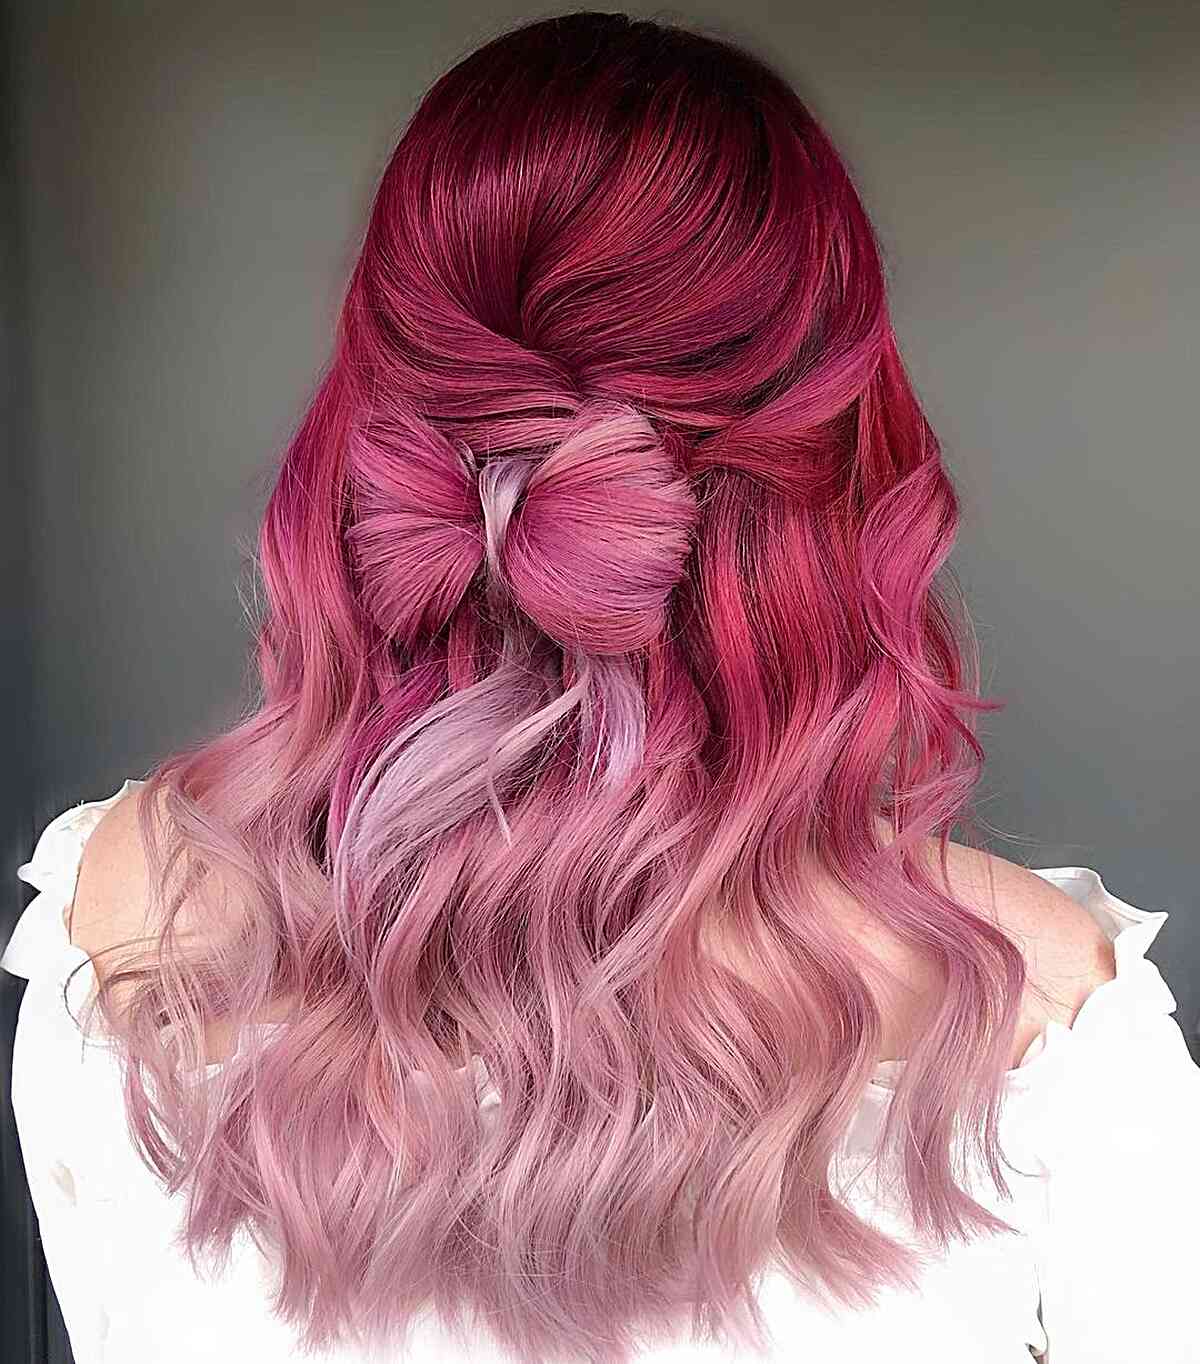 festival hairstyles,half up festival hairstyles,
easy festival hairstyles,
cute festival hairstyles,
christmas hairstyles,
cute christmas hairstyles,
easy christmas hairstyles,
christmas hairstyles for black hair,
christmas hairstyles easy,
christmas hairstyles for black girl,
easy christmas hairstyles for short hair,
short hair christmas hairstyles,
Top 10 Christmas Cute Festival Hairstyles to Rock Your Look in 2023,
